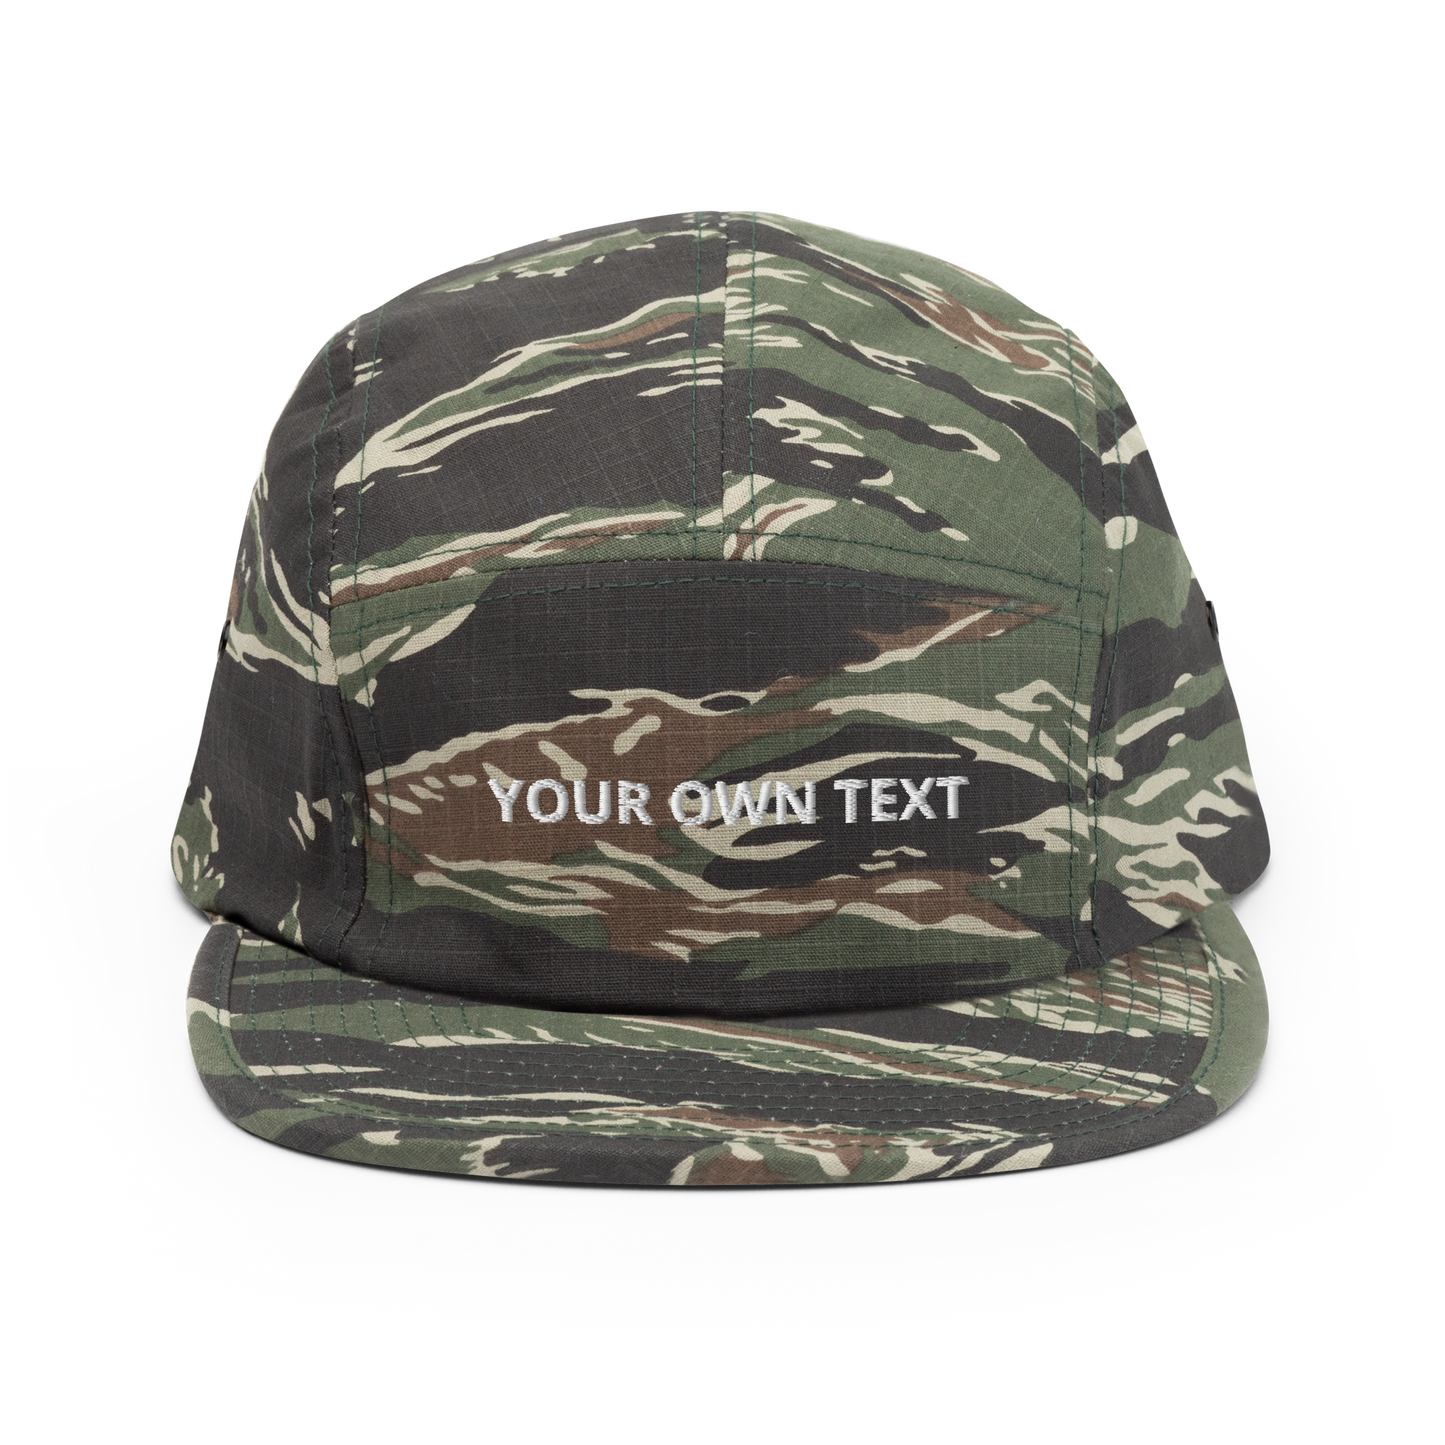 Your Own Text - Five Panel Cap